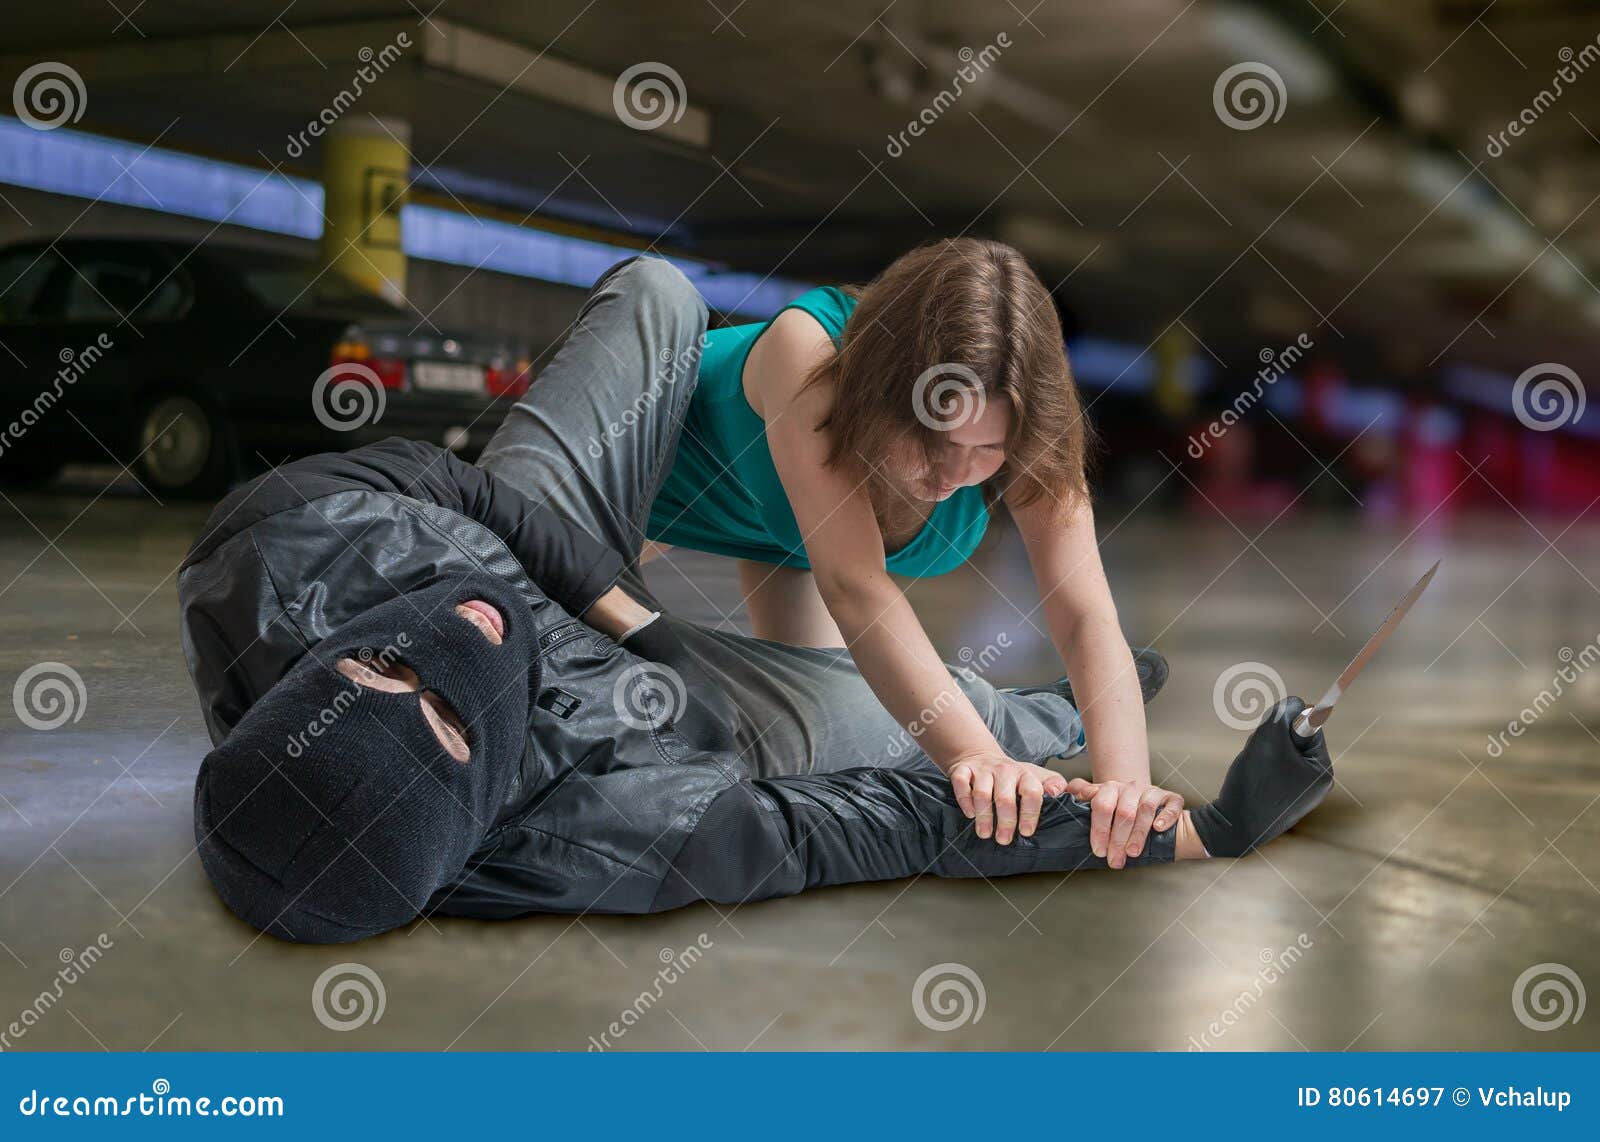 self defense concept. young woman is fighting with mugger or thief